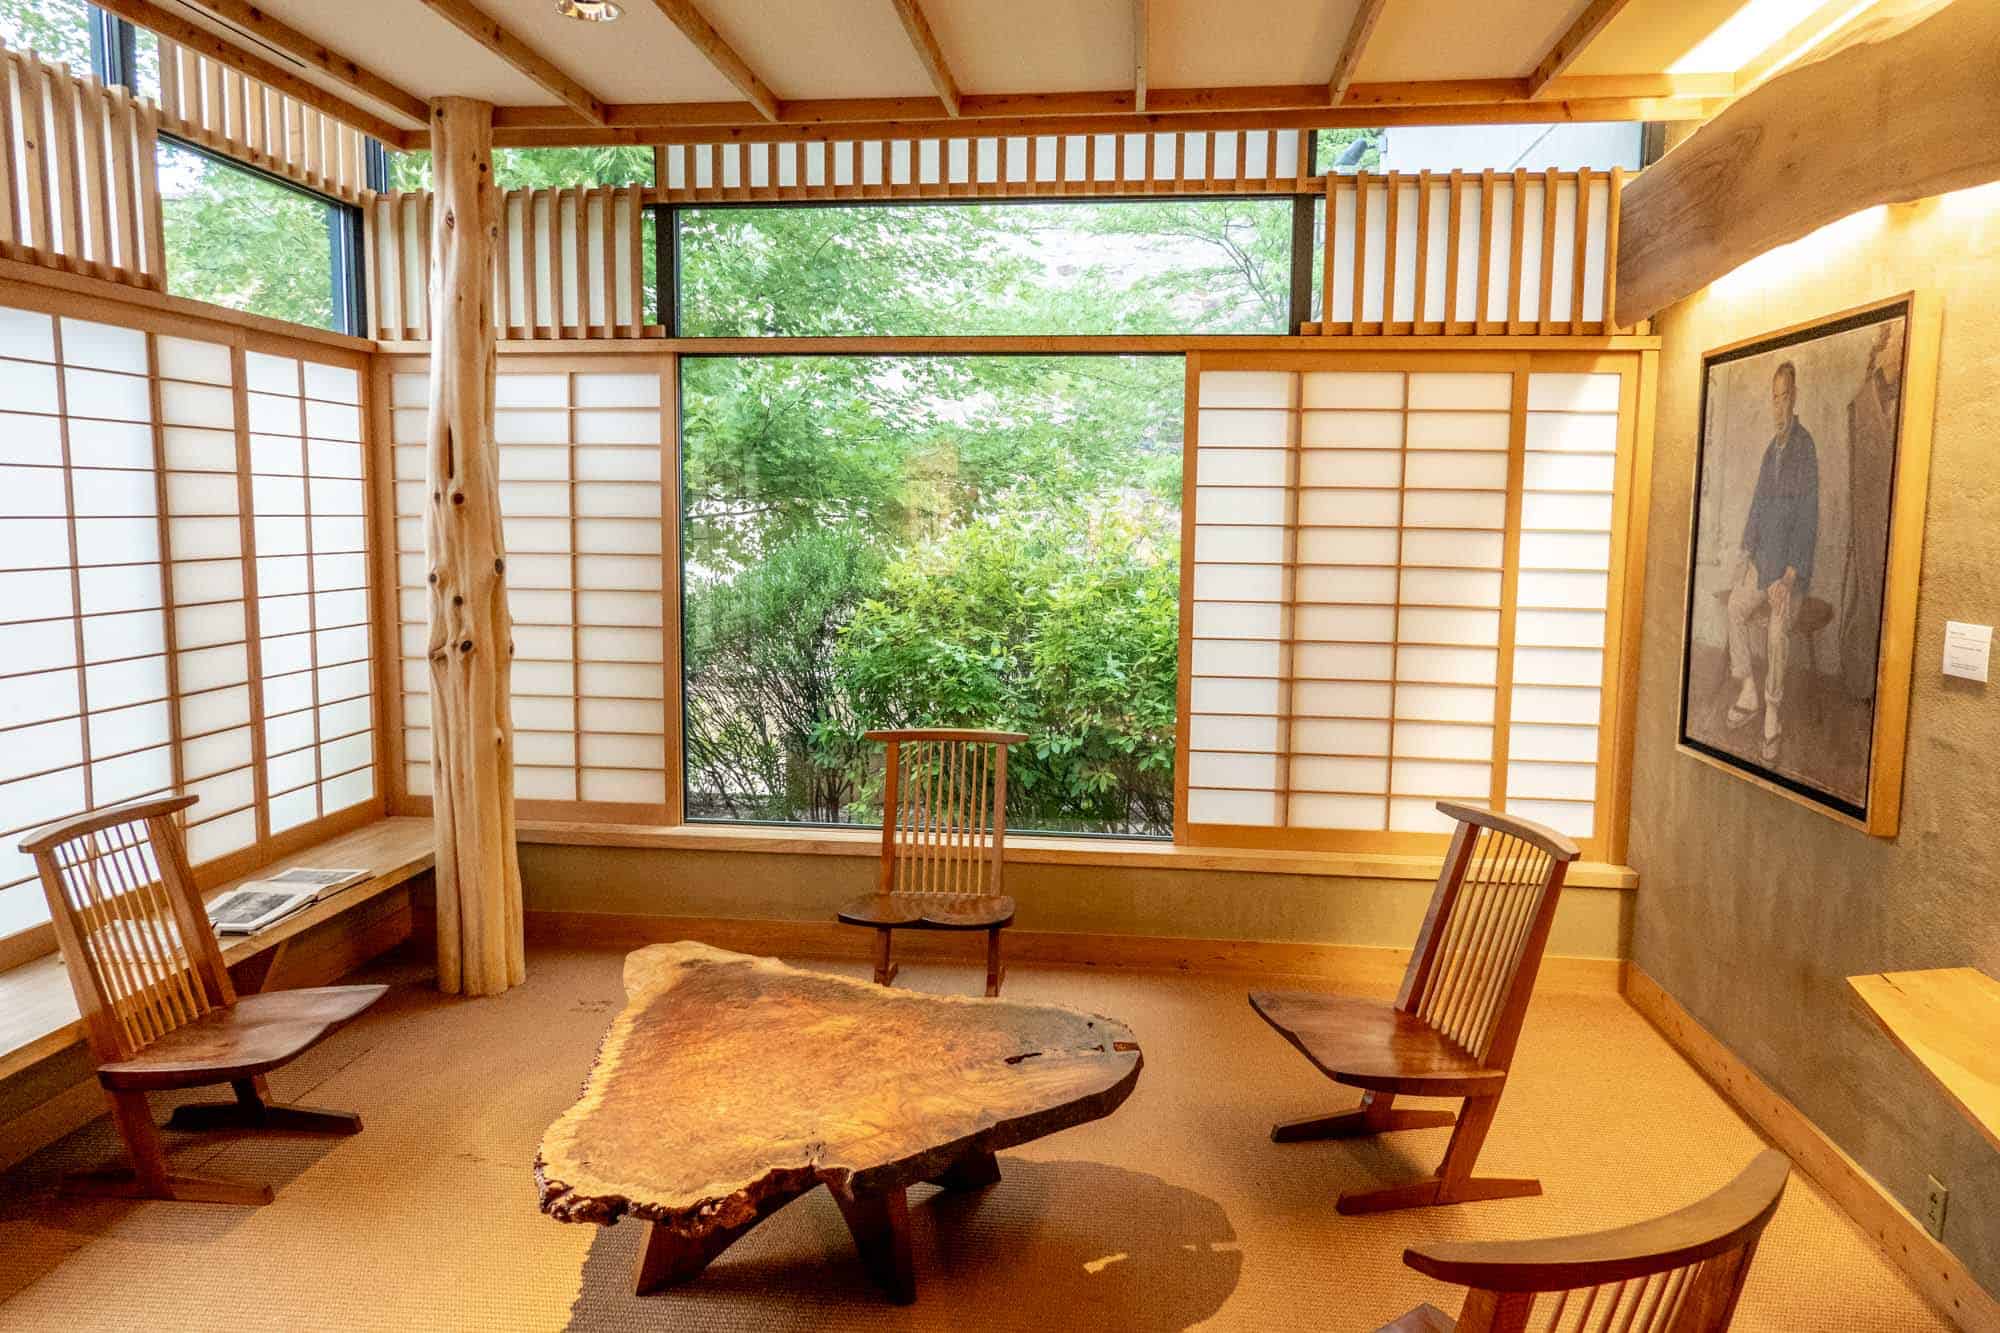 Room with wooden chairs and table and Japanese-style window coverings